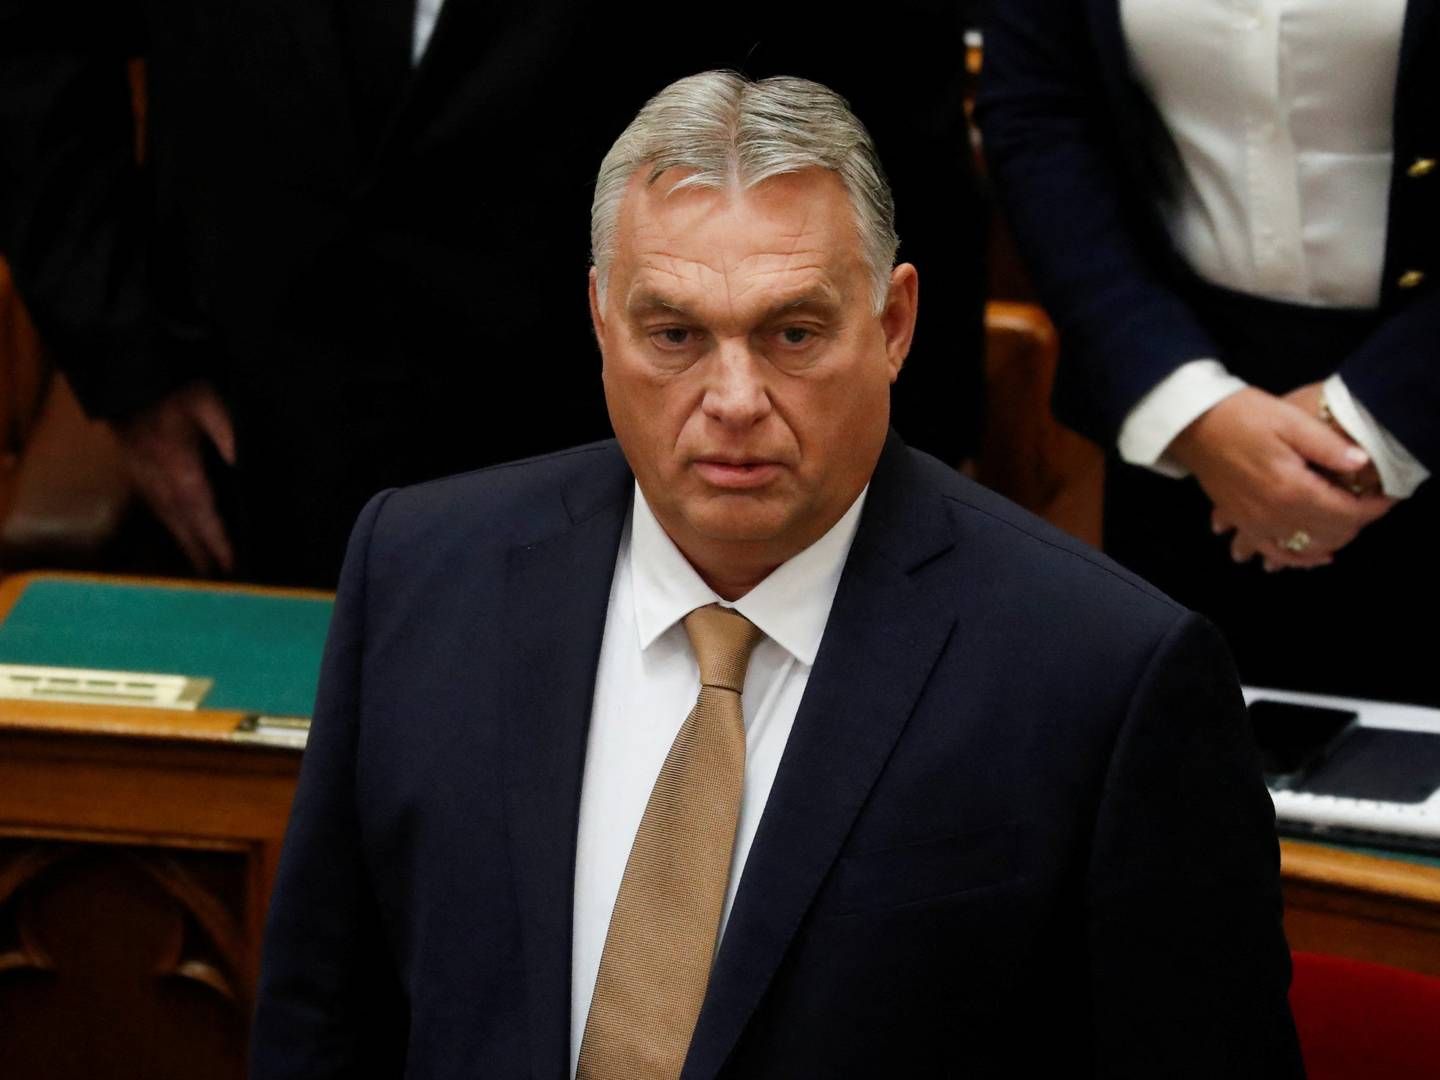 Hungarian Prime Minister Viktor Orbán blames rising inflation and recession prospects to EU sanctions against Russia, with him saying a dwarf cannot succeed sanctioning a giant. | Photo: BERNADETT SZABO/REUTERS / X02784